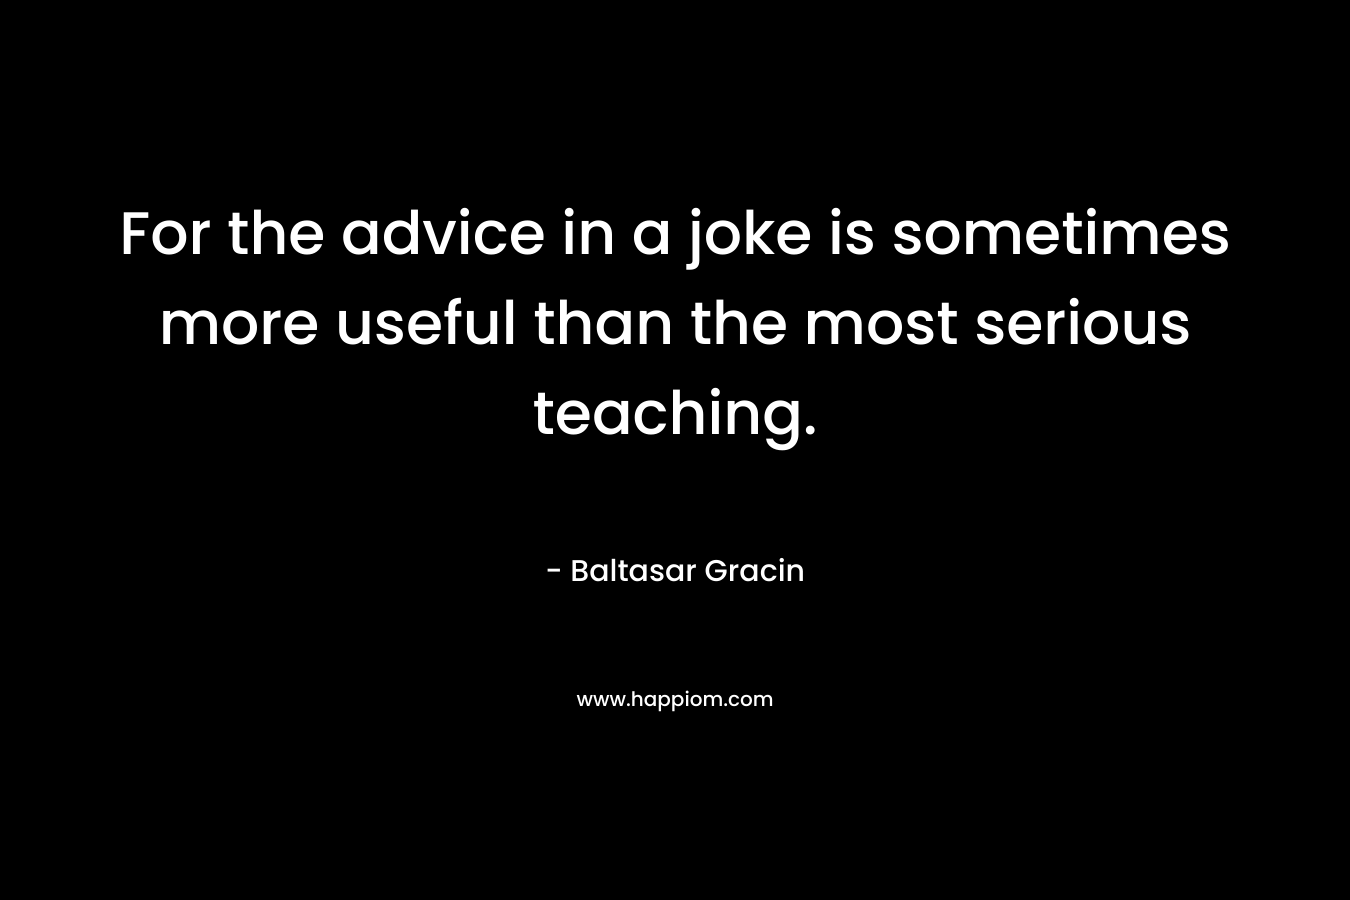 For the advice in a joke is sometimes more useful than the most serious teaching. – Baltasar Gracin